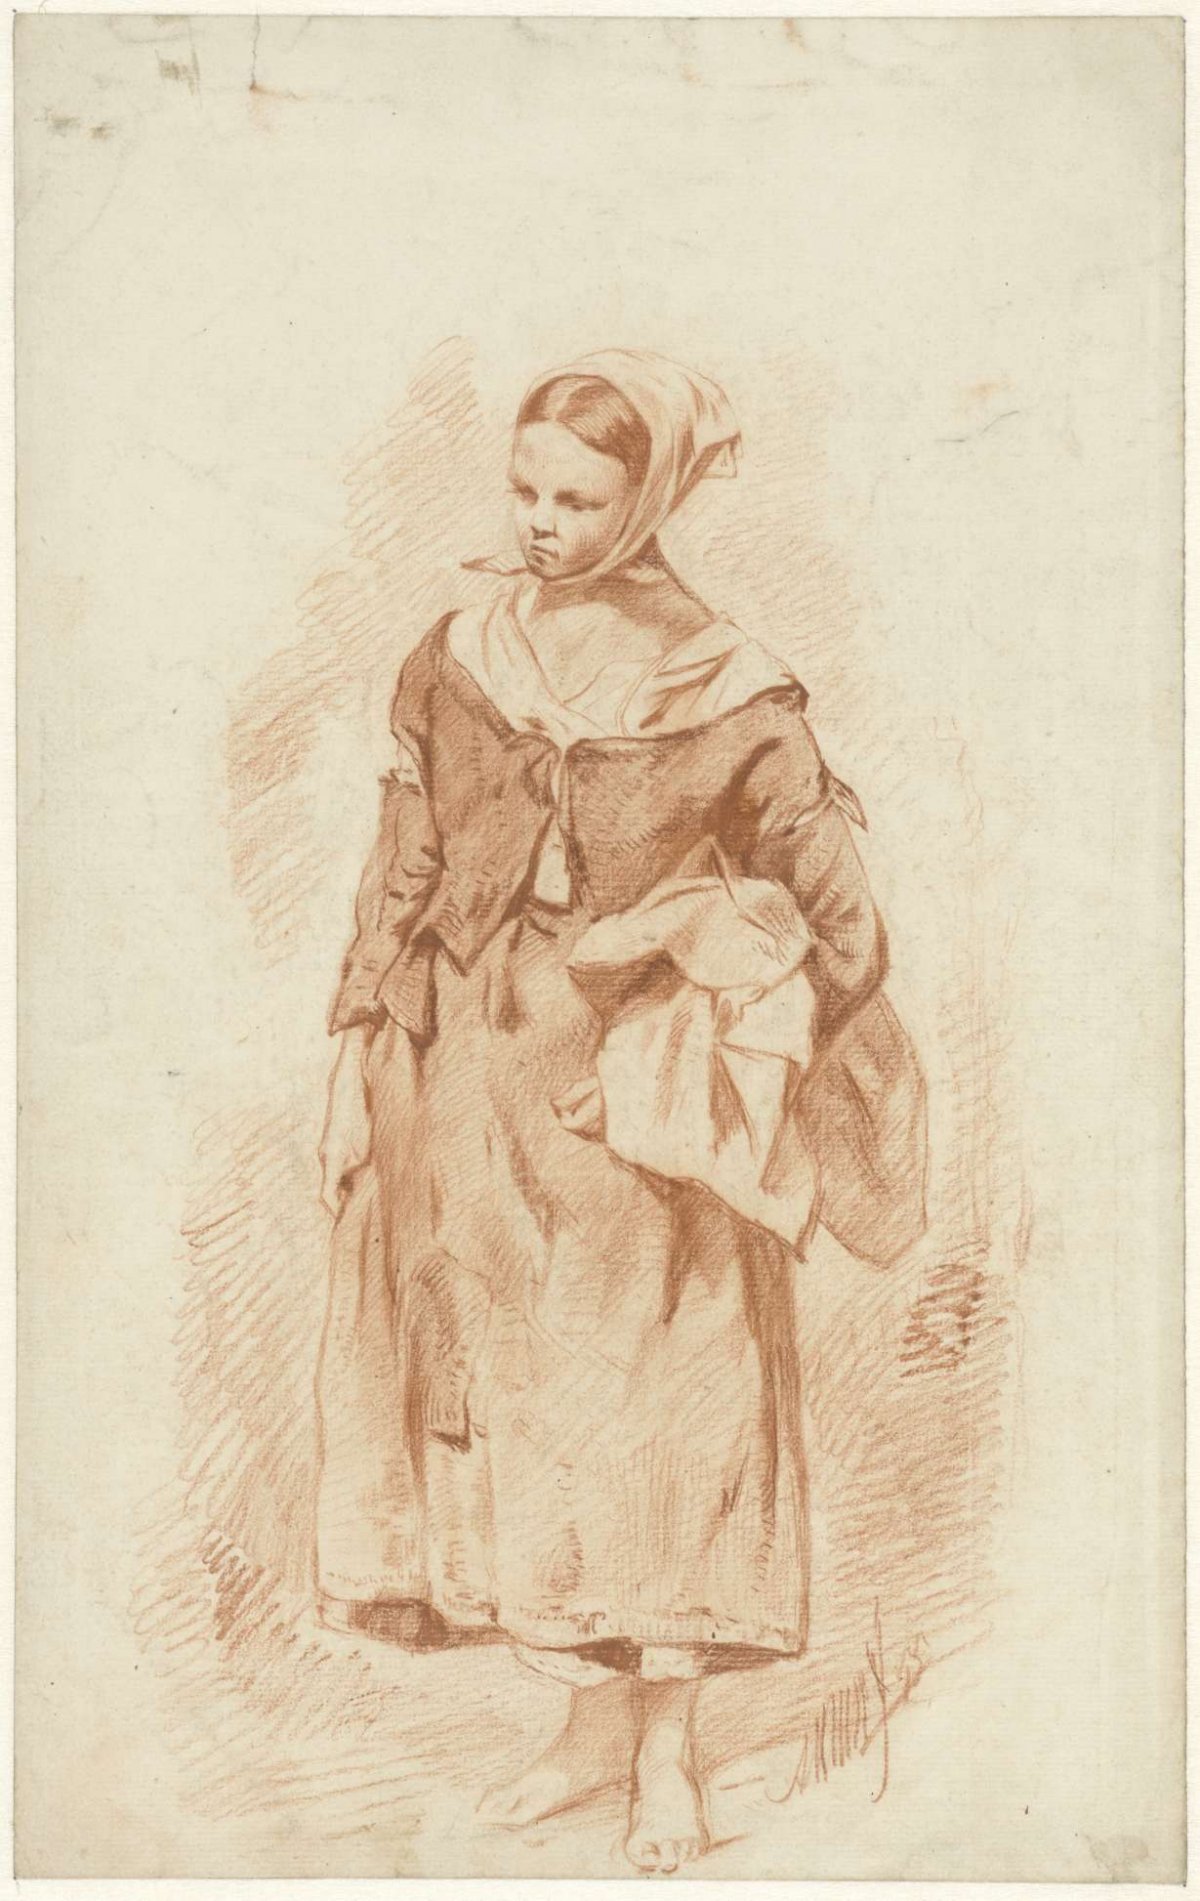 Standing woman with headscarf, Anton Mauve, 1855